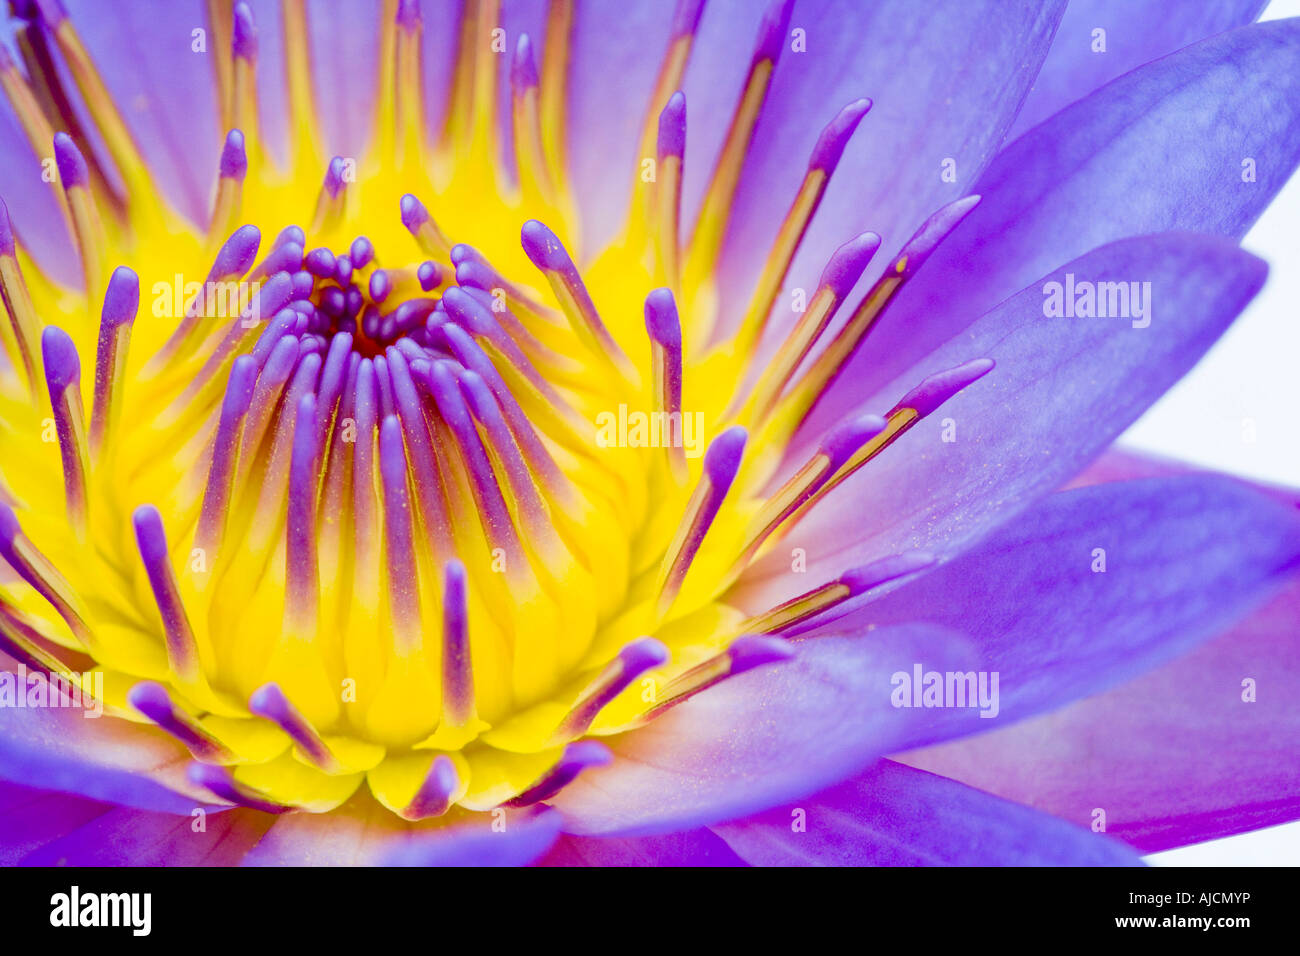 Nymphaea caerulea. Tropical waterlily against white background Stock Photo